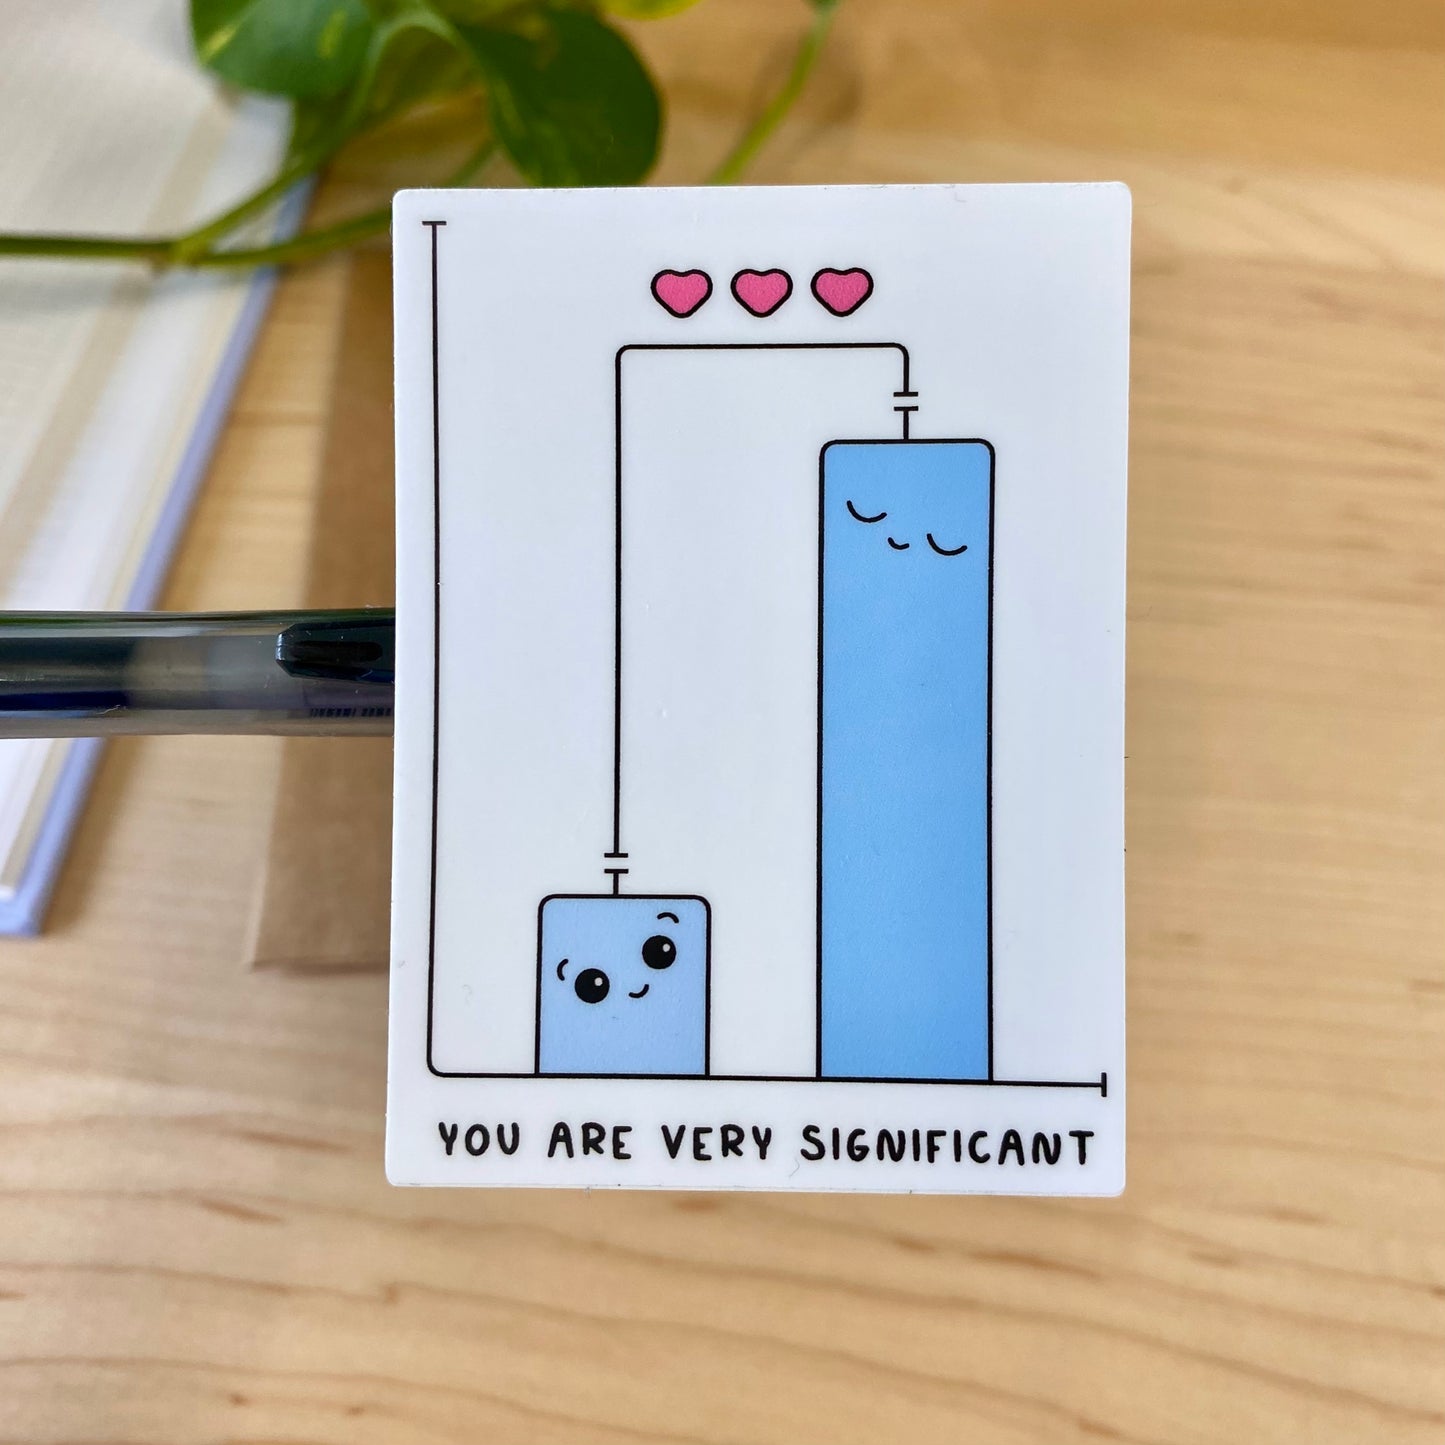 "You are very significant" Vinyl Sticker